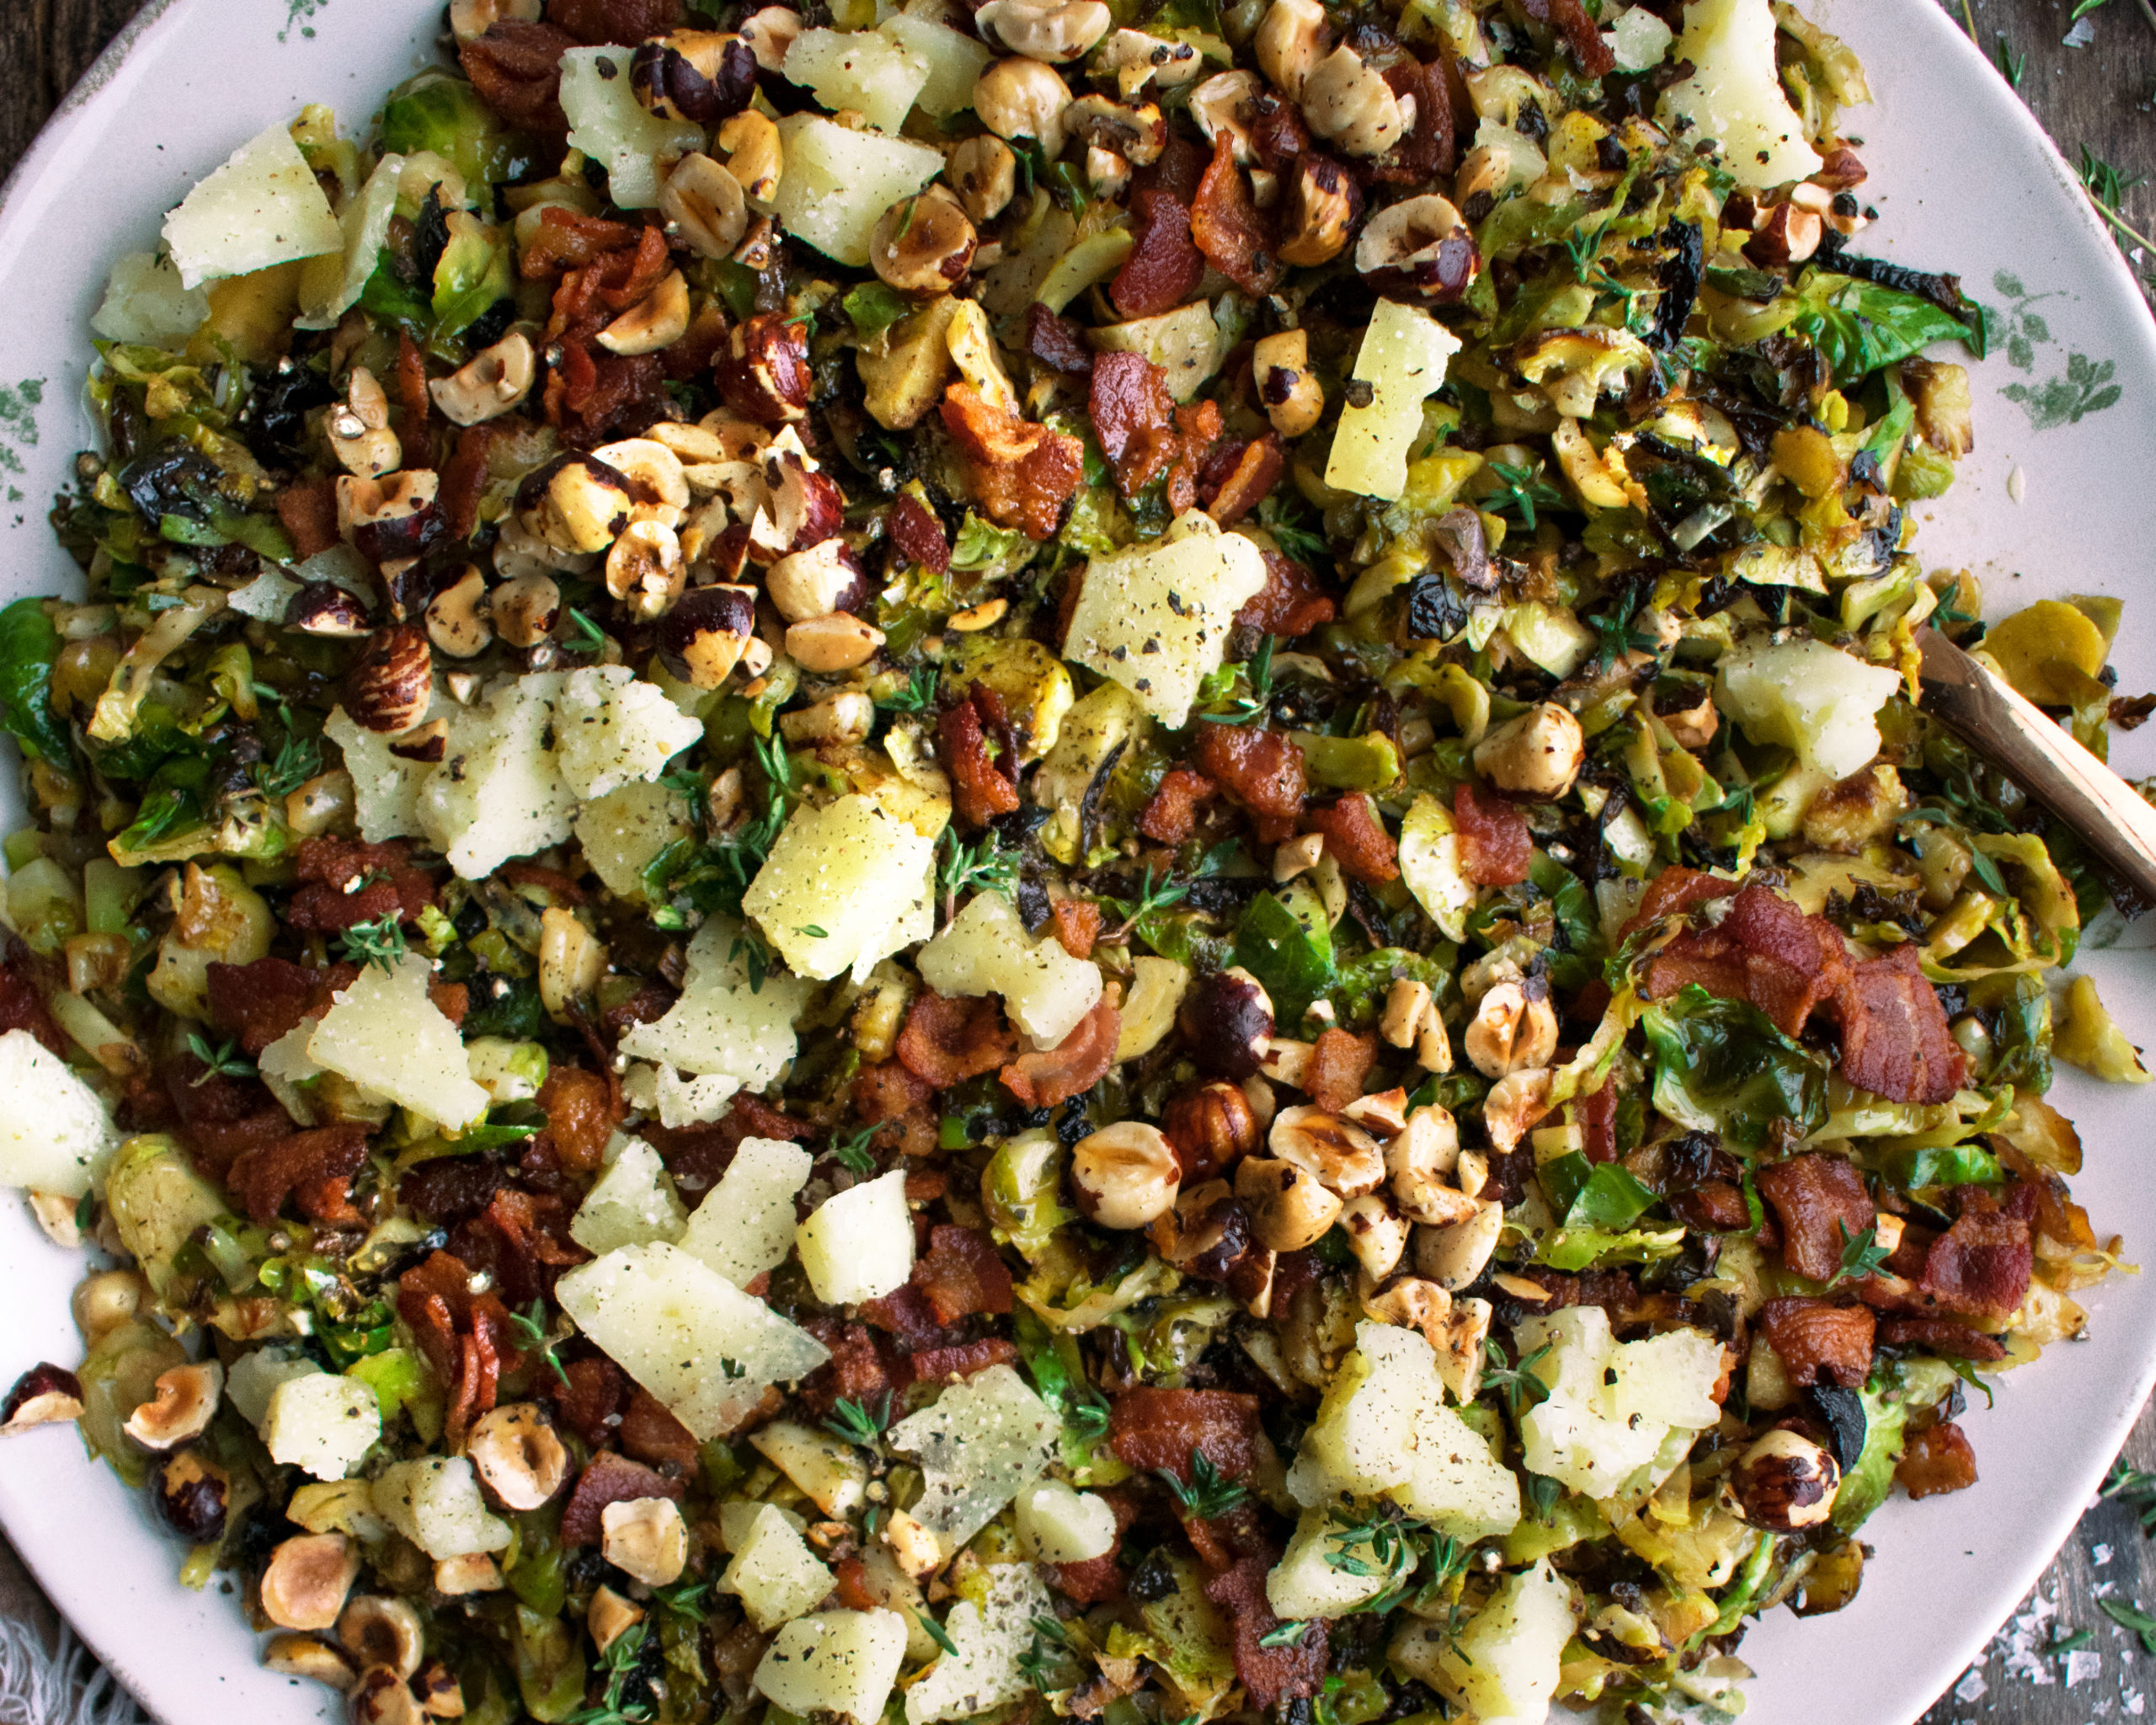 https://www.theoriginaldish.com/wp-content/uploads/2021/12/Shaved-Brussels-Sprouts-with-Bacon-Cider-Syrup-4-scaled.jpg